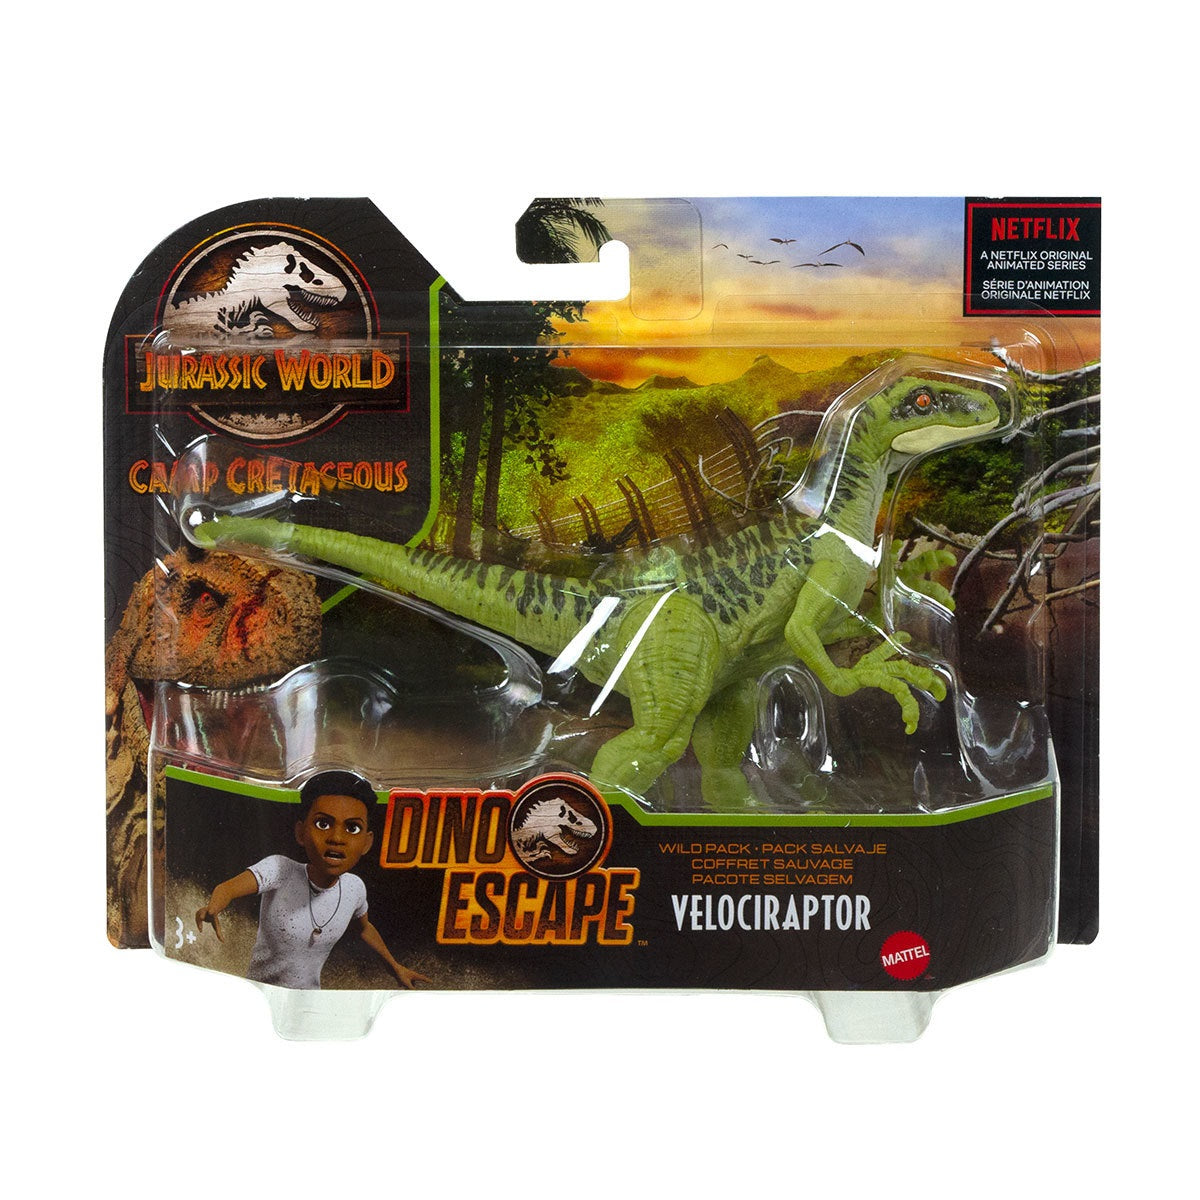 Jurassic World Wild Pack (Styles Vary - One Supplied)